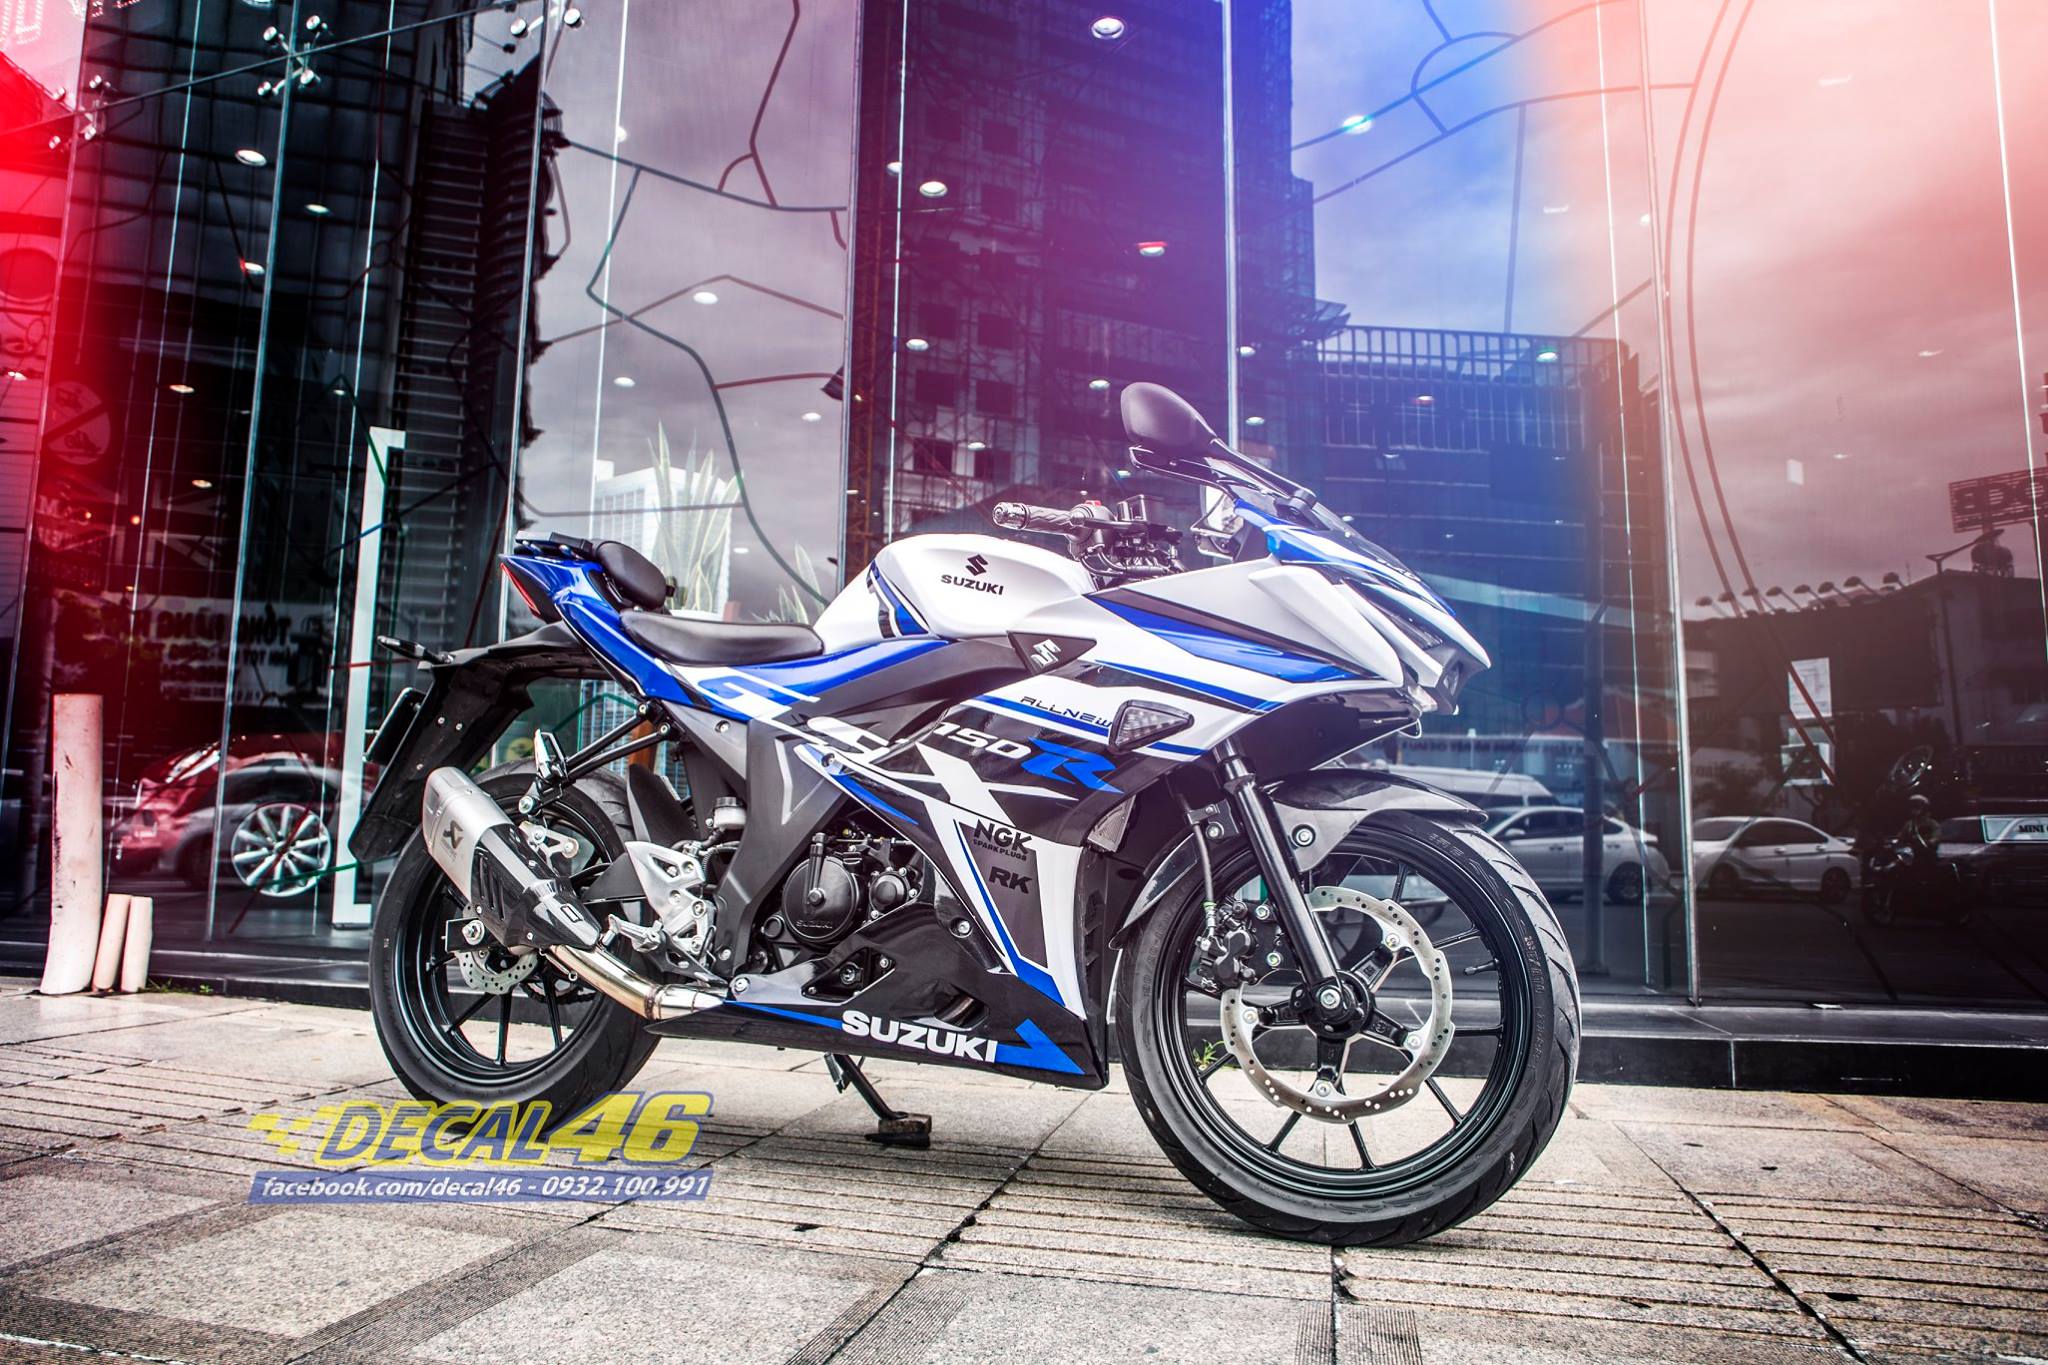 This Suzuki R150 is Equipped with an Akrapovic Exhaust and a Face Kit - shot